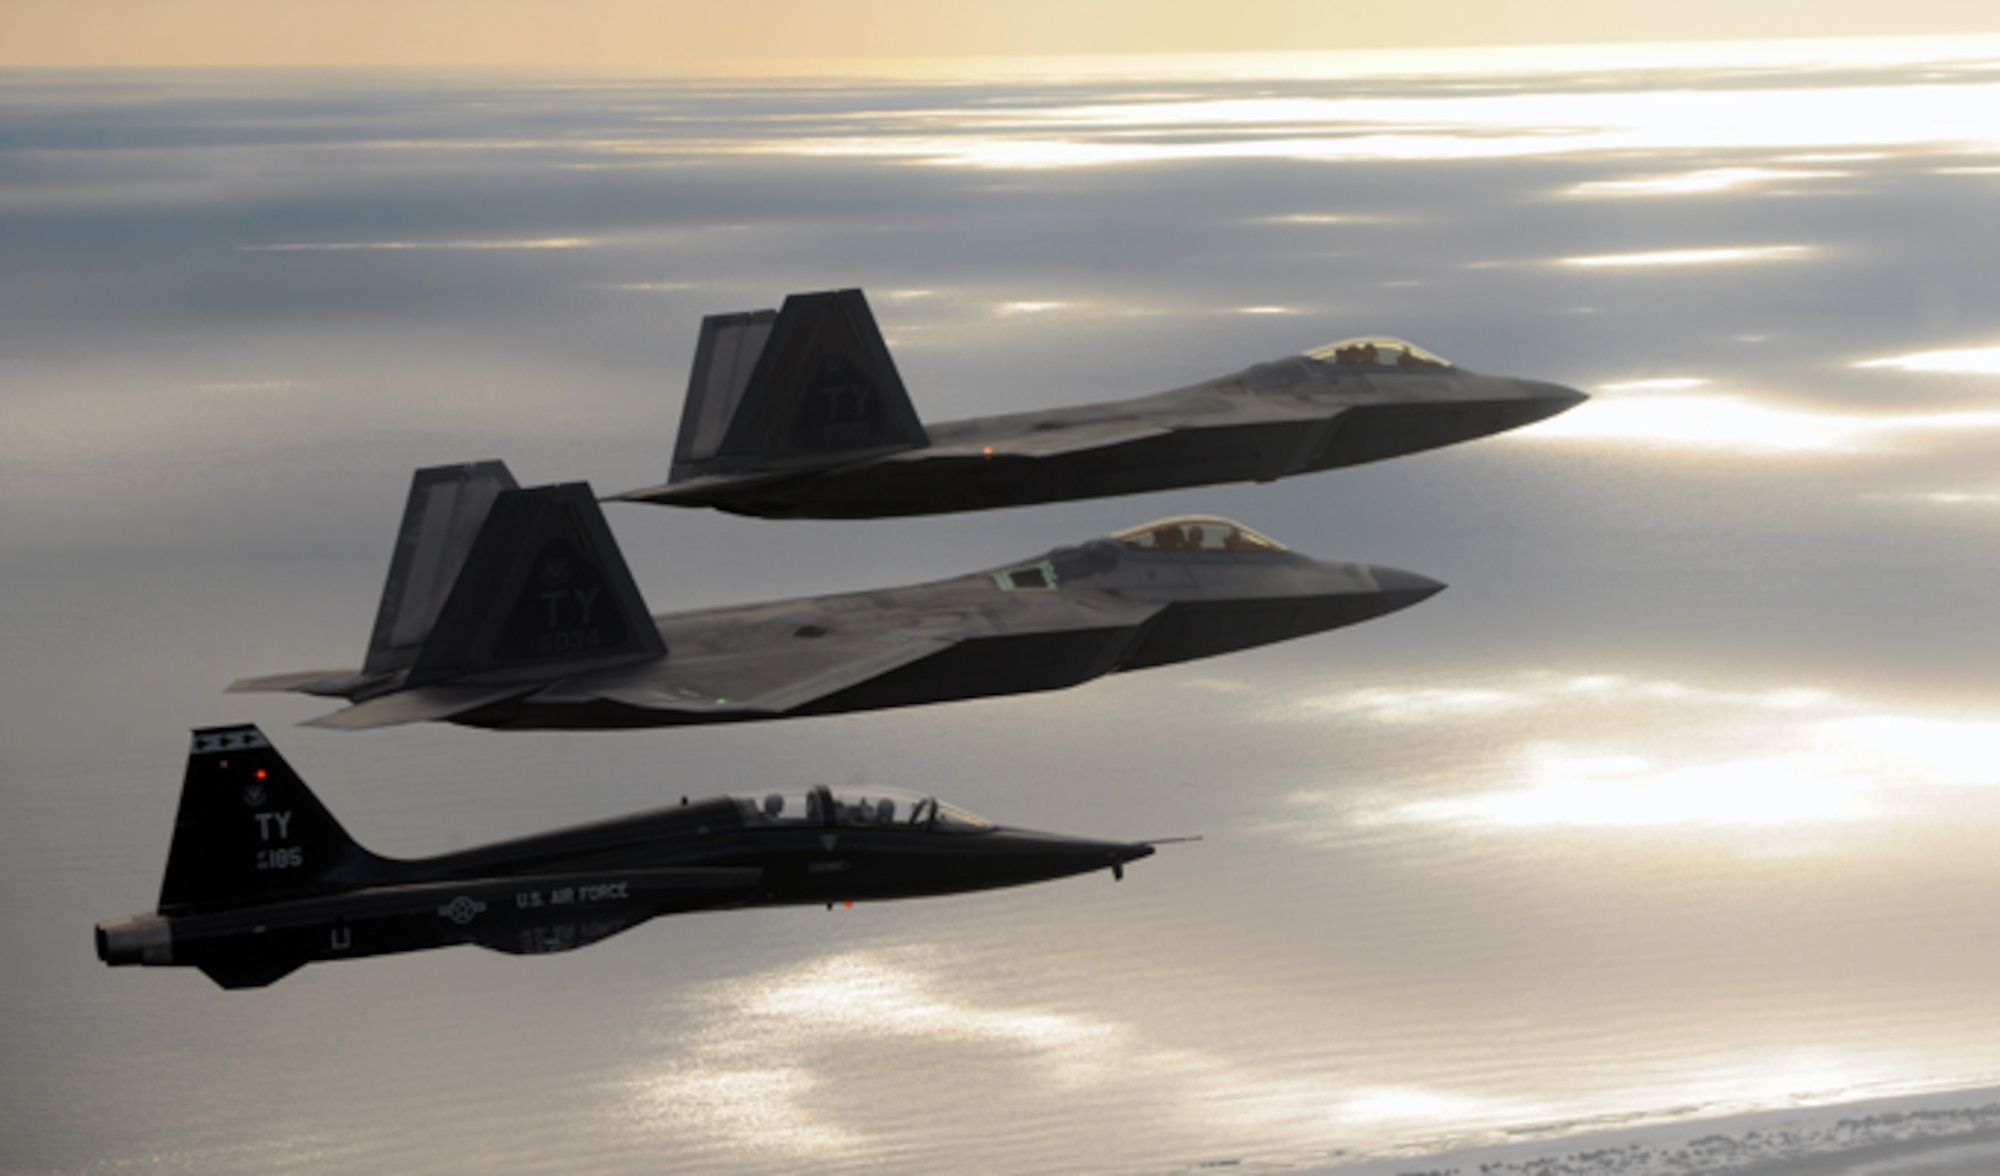 Two F-22 Raptors and a T-38 Talon from Tyndall Air Force Base, Florida, fly together during a 43rd Fighter Squadron Basic Course training mission Oct. 7, 2013 over Florida. A sortie begins when an individual aircraft takes off and ends when it lands. The 43rd FS is the only squadron in the world that trains and develops F-22 pilots. (U.S. Air Force photo/Master Sgt. J. Wilcox)